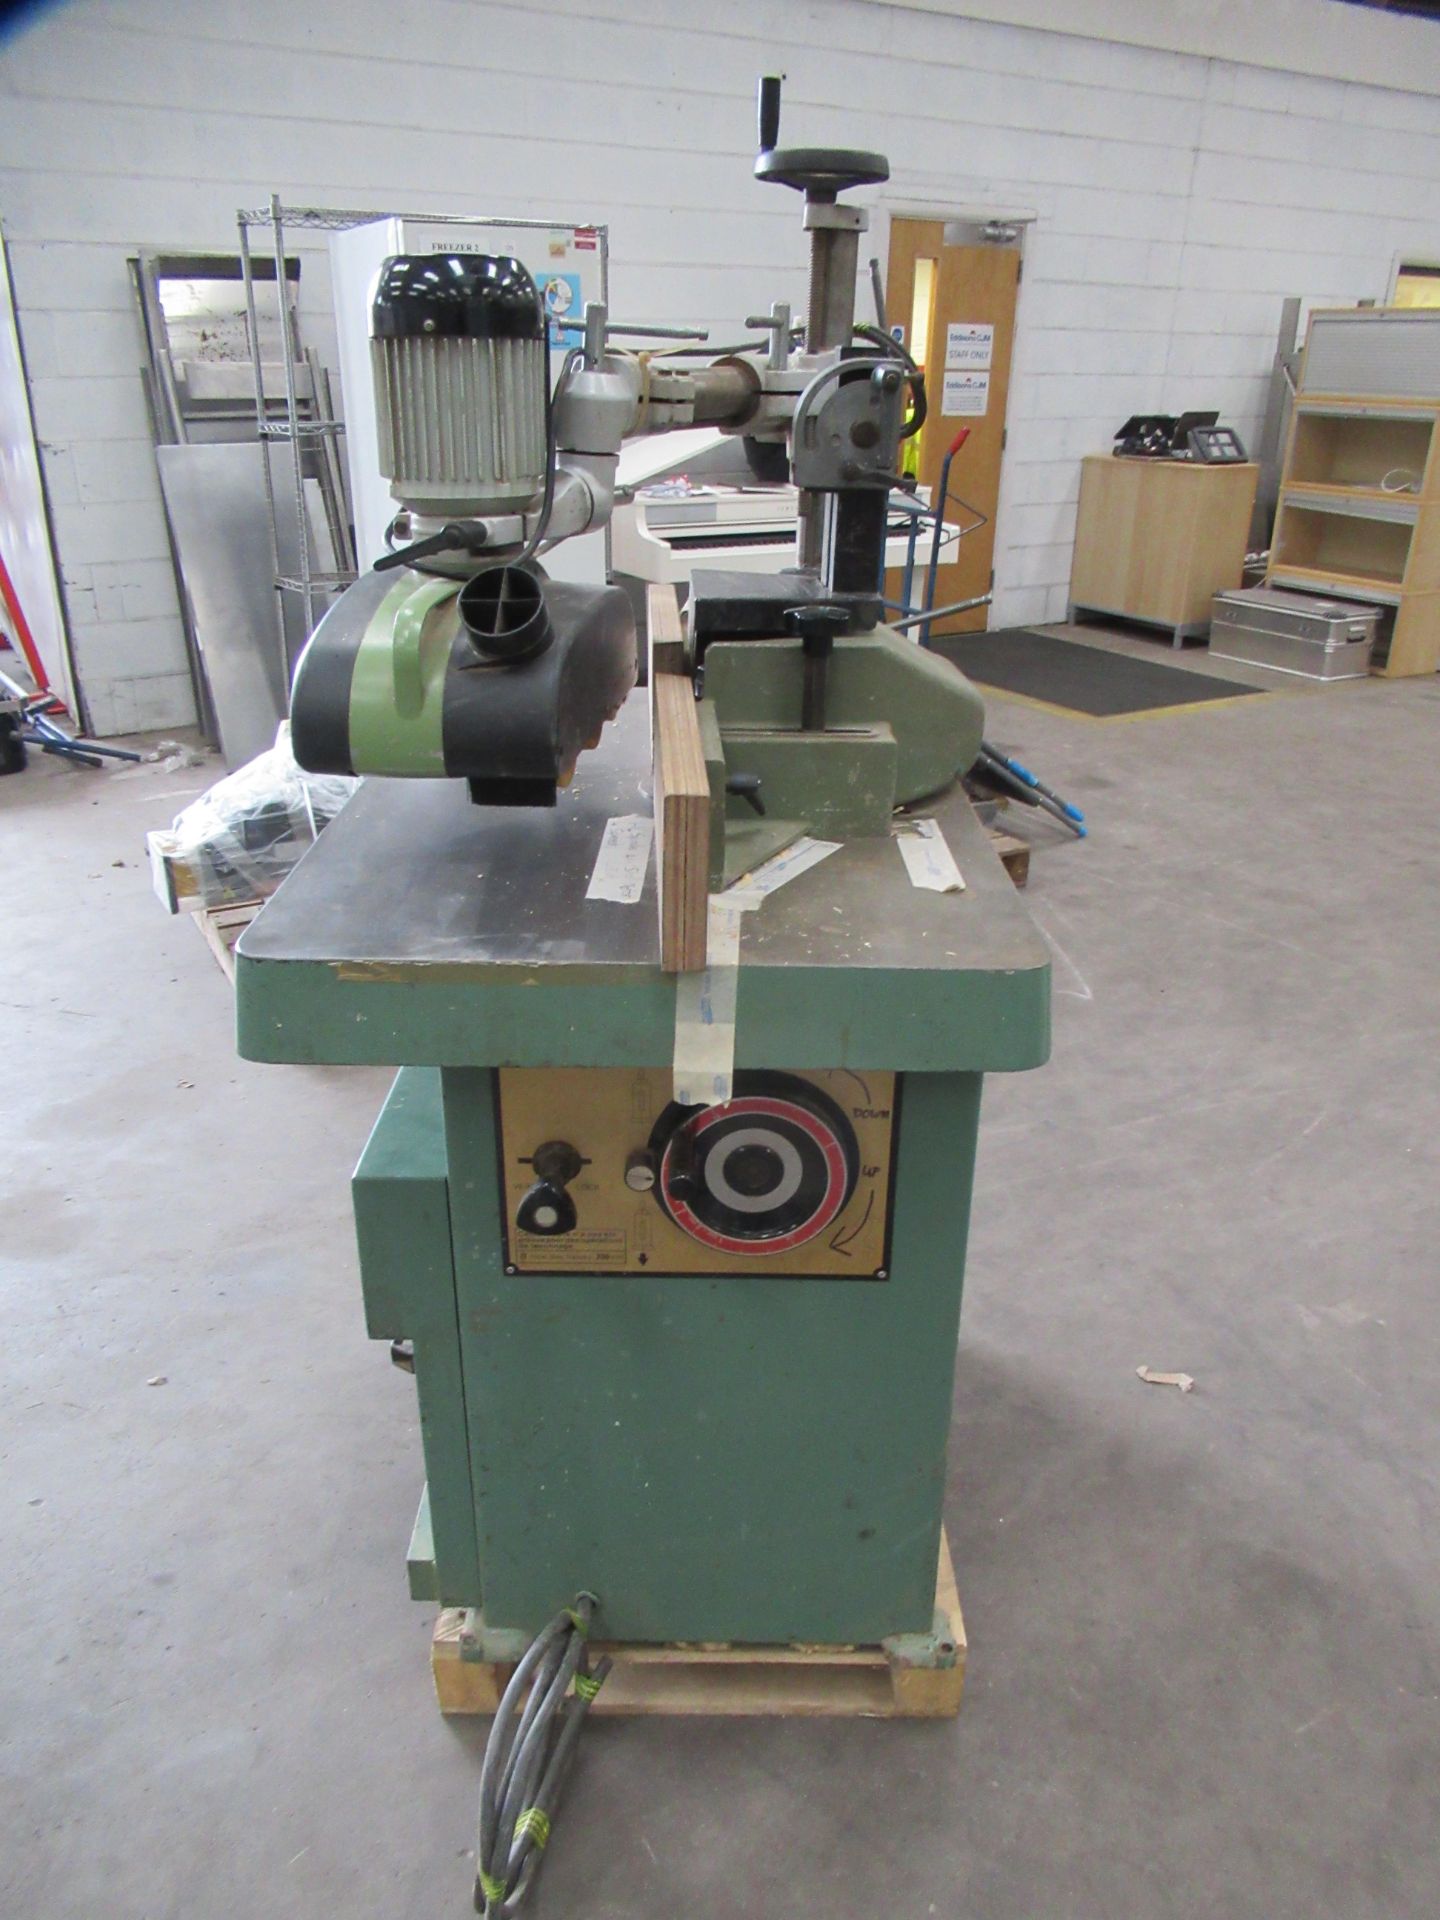 1 1/4" Spindle Moulder 4 Speed 4kW 415V with Powerd Roller Feed - Image 7 of 9